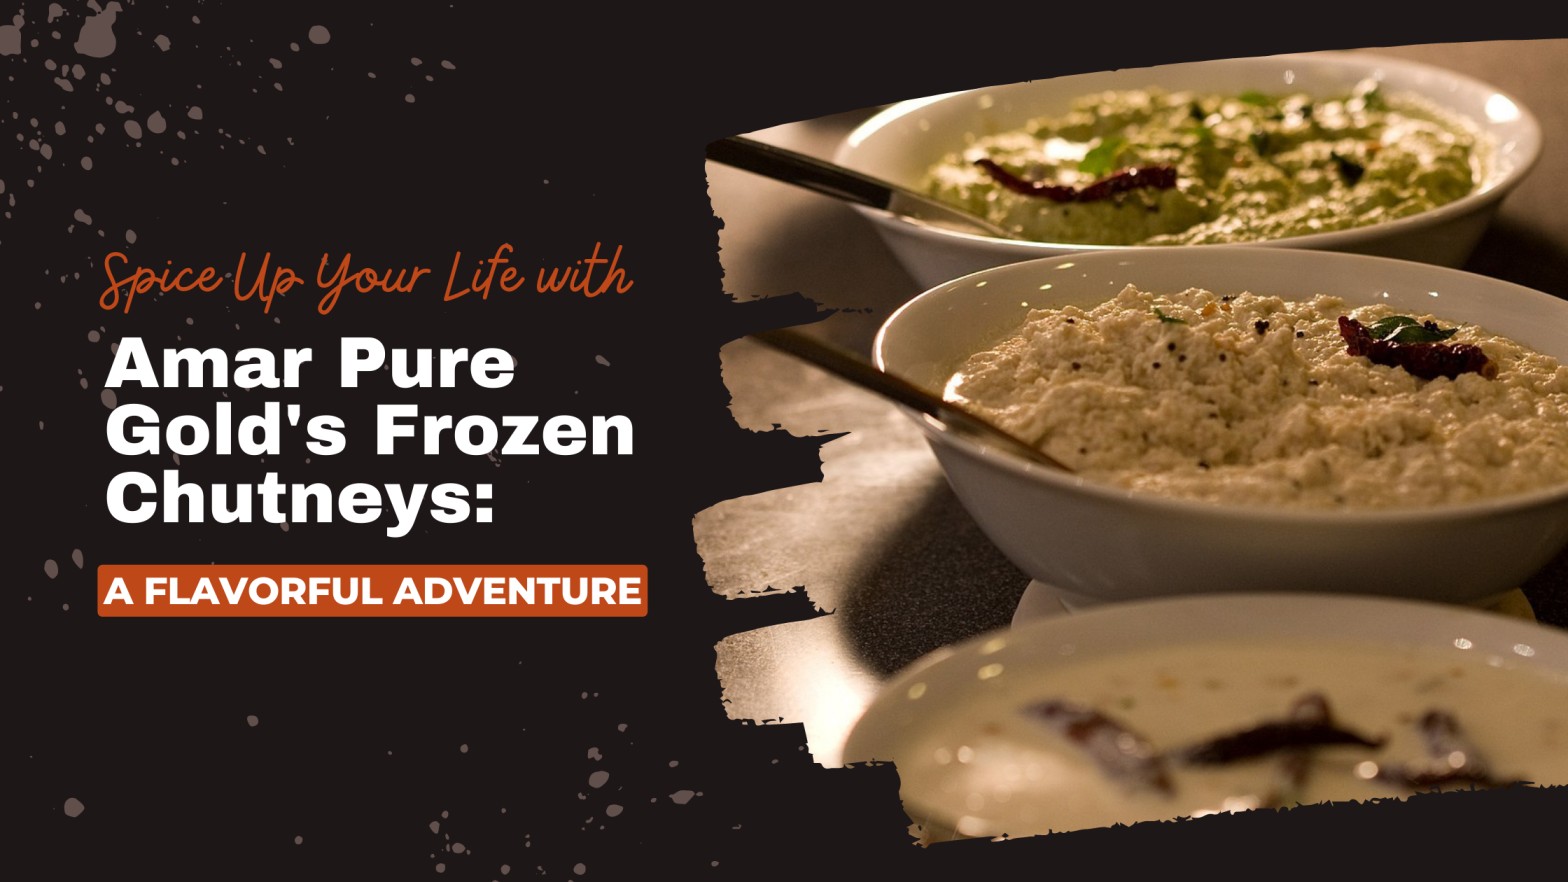 Spice Up Your Life with Amar Pure Gold’s Frozen Chutneys: A Flavorful Adventure